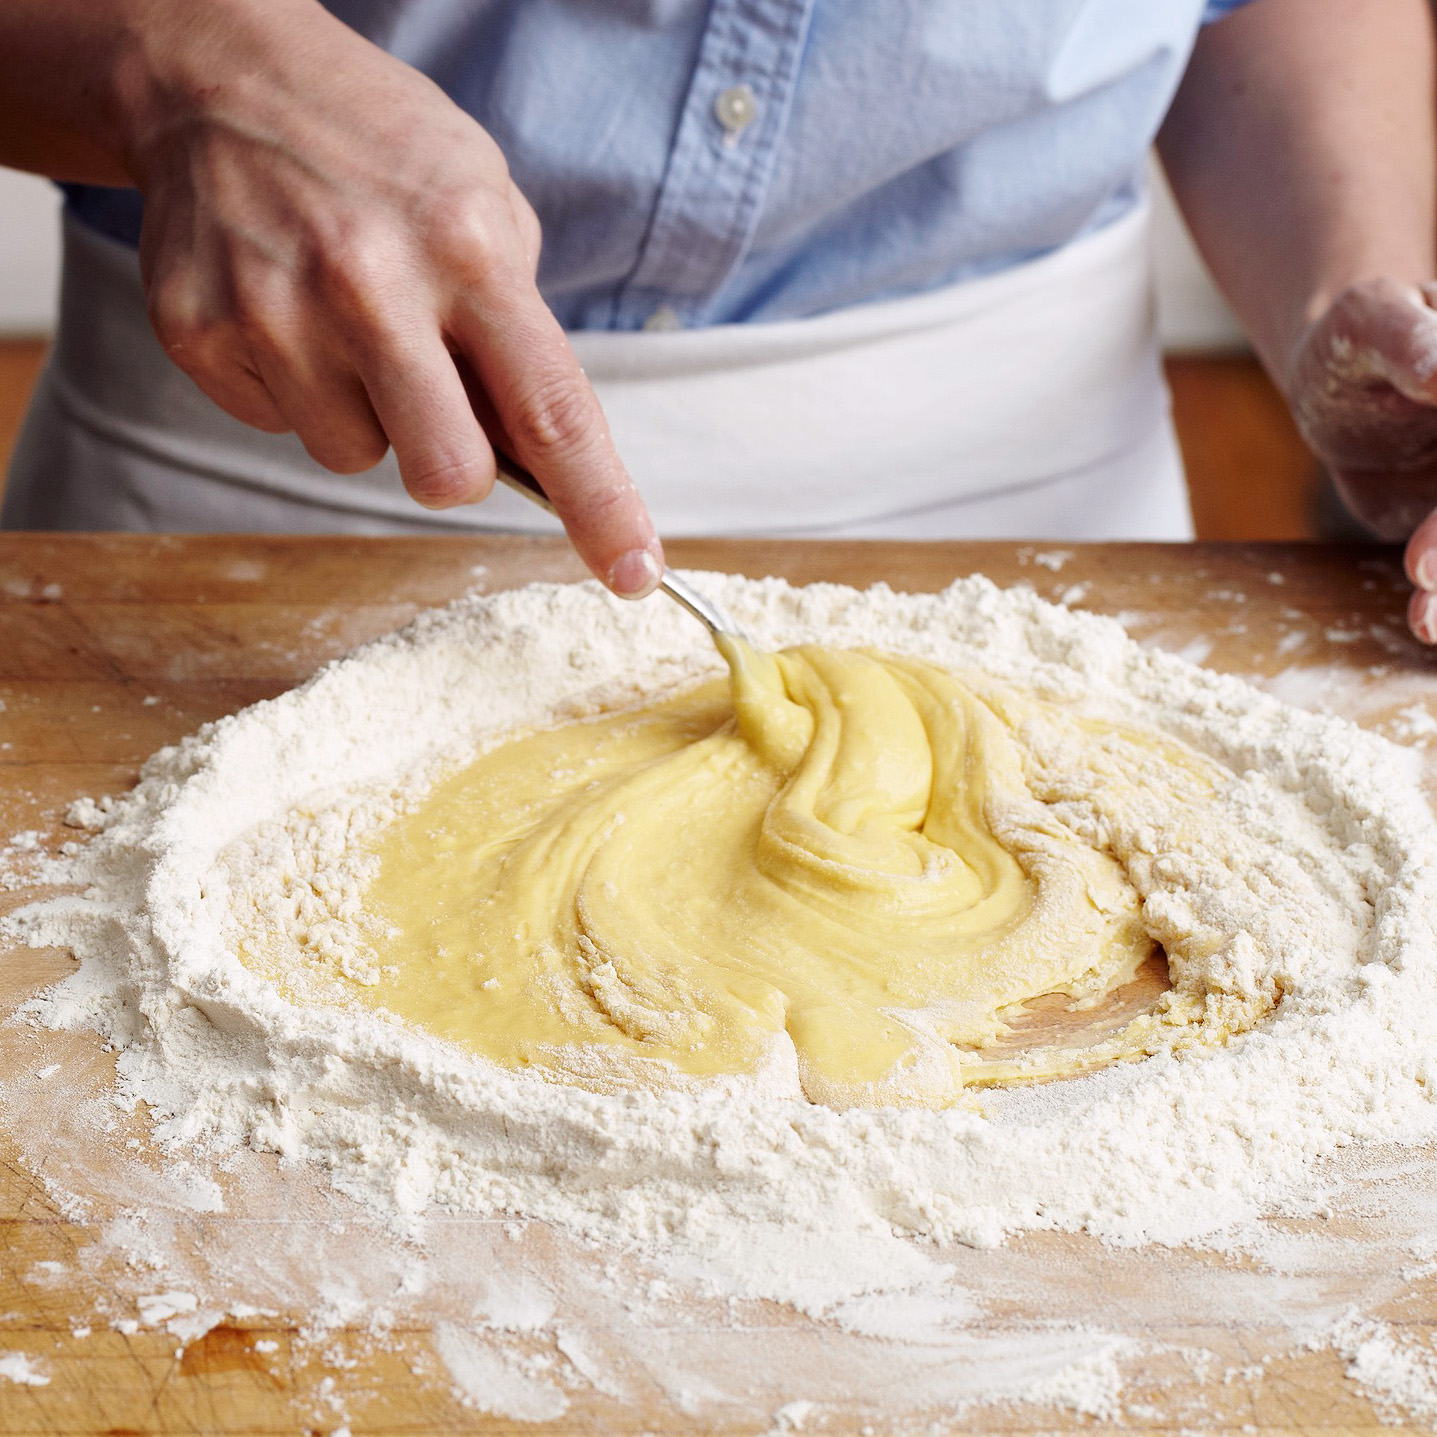 mixing eggs and flour together to form pasta dough